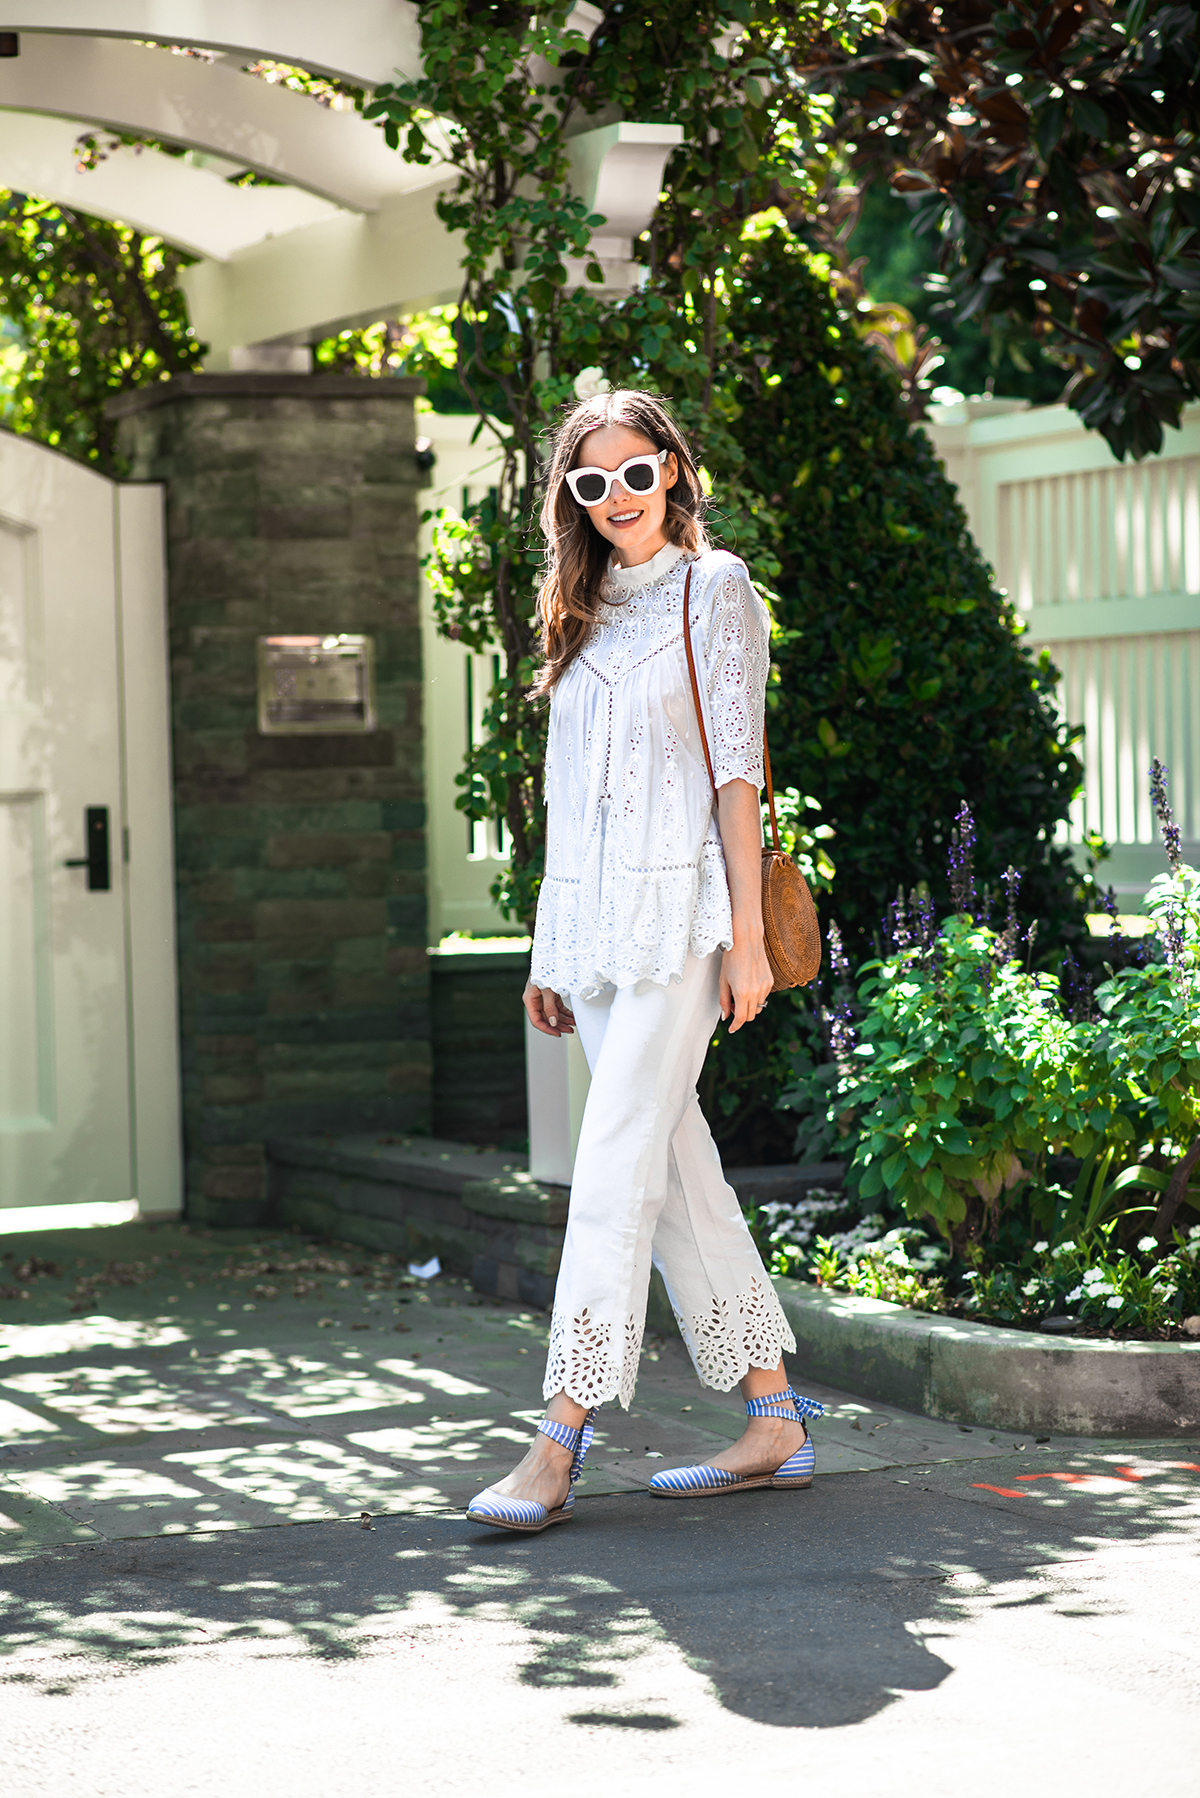 Alyssa Campanella of The A List blog wearing white eyelet Zimmermann top and Rebecca Taylor jeans and MDS Stripes Margaux NY espadrilles.